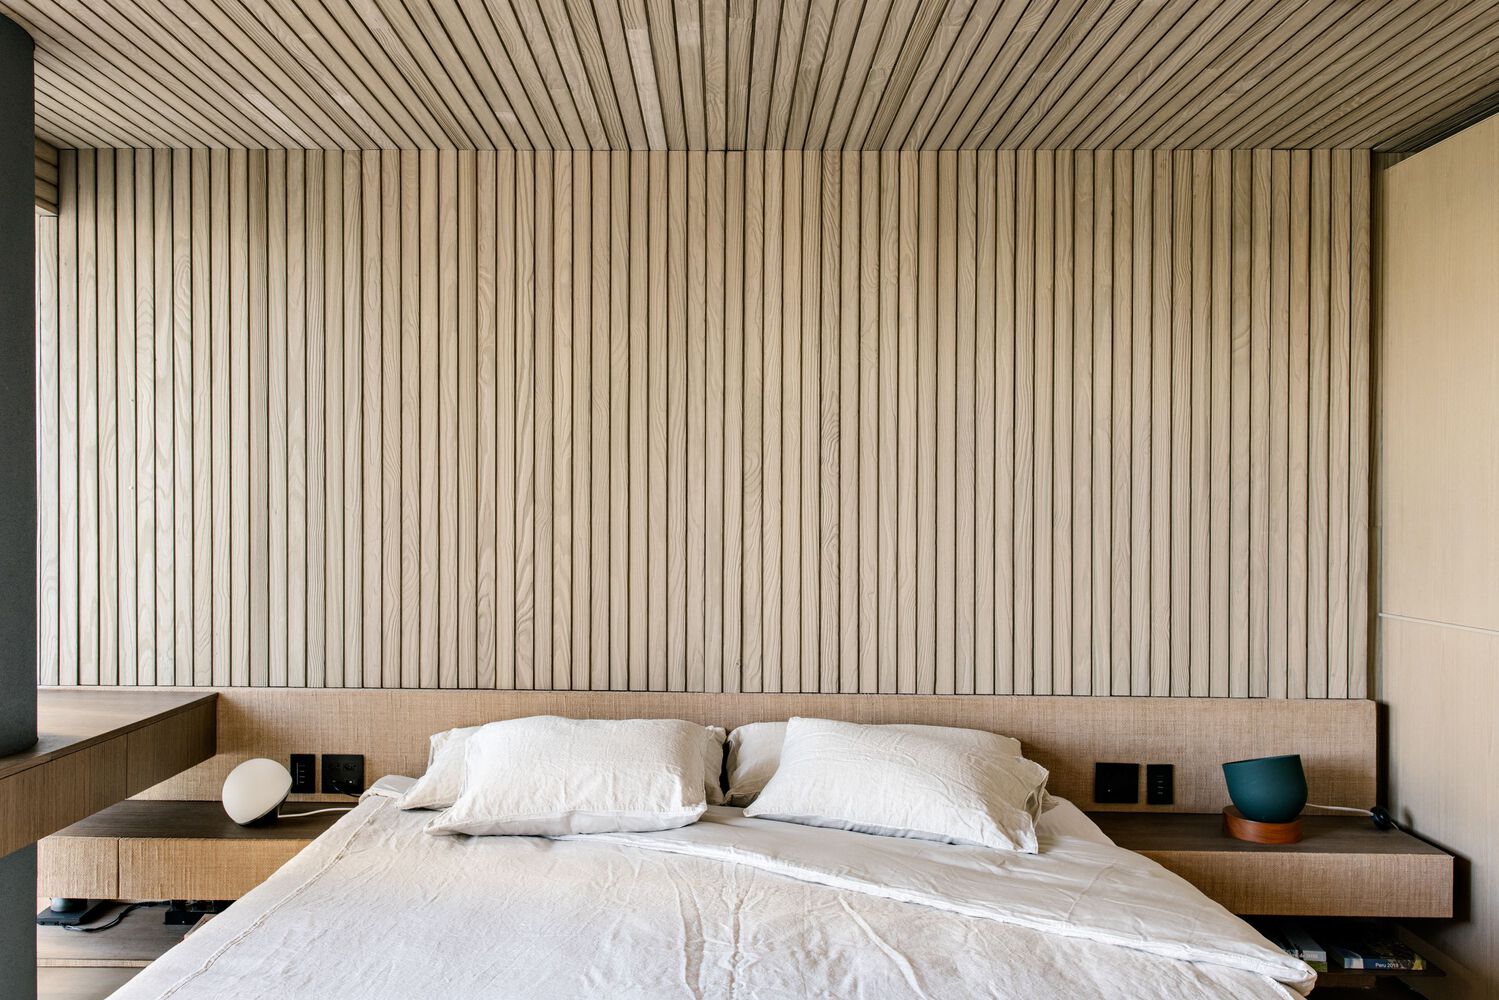 The wood paneling of the bedroom. Photo by Fran Parente.